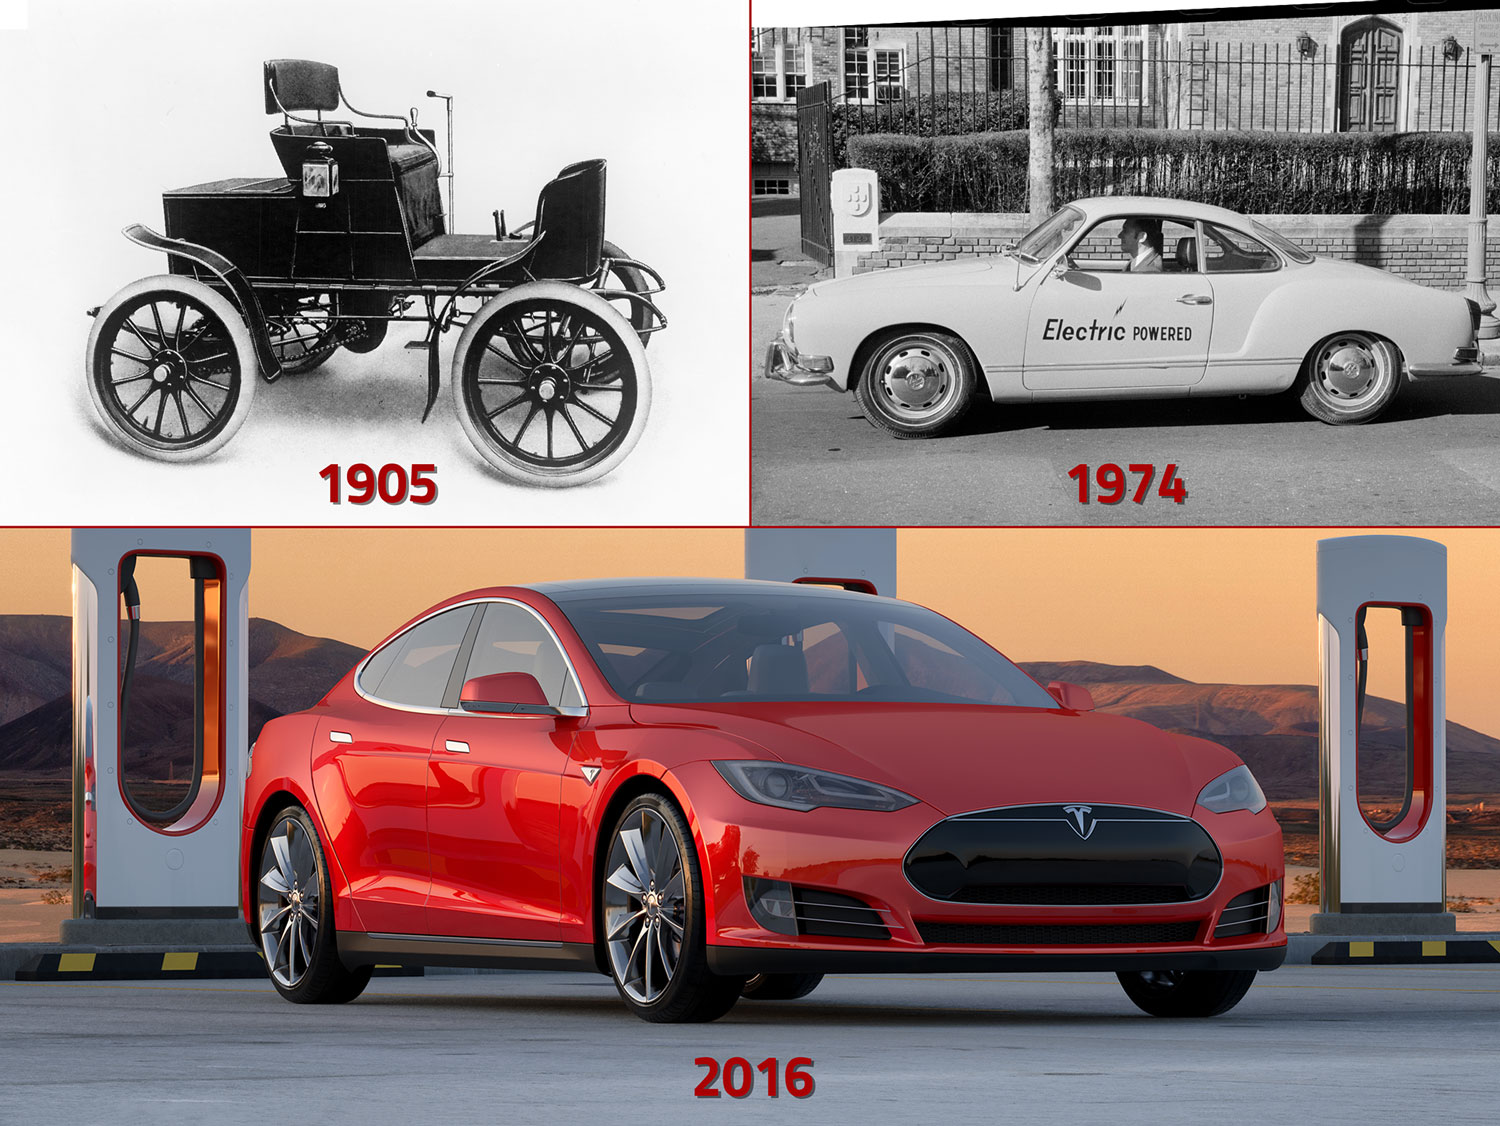 Electric cars from 1905, 1924, and 2016.